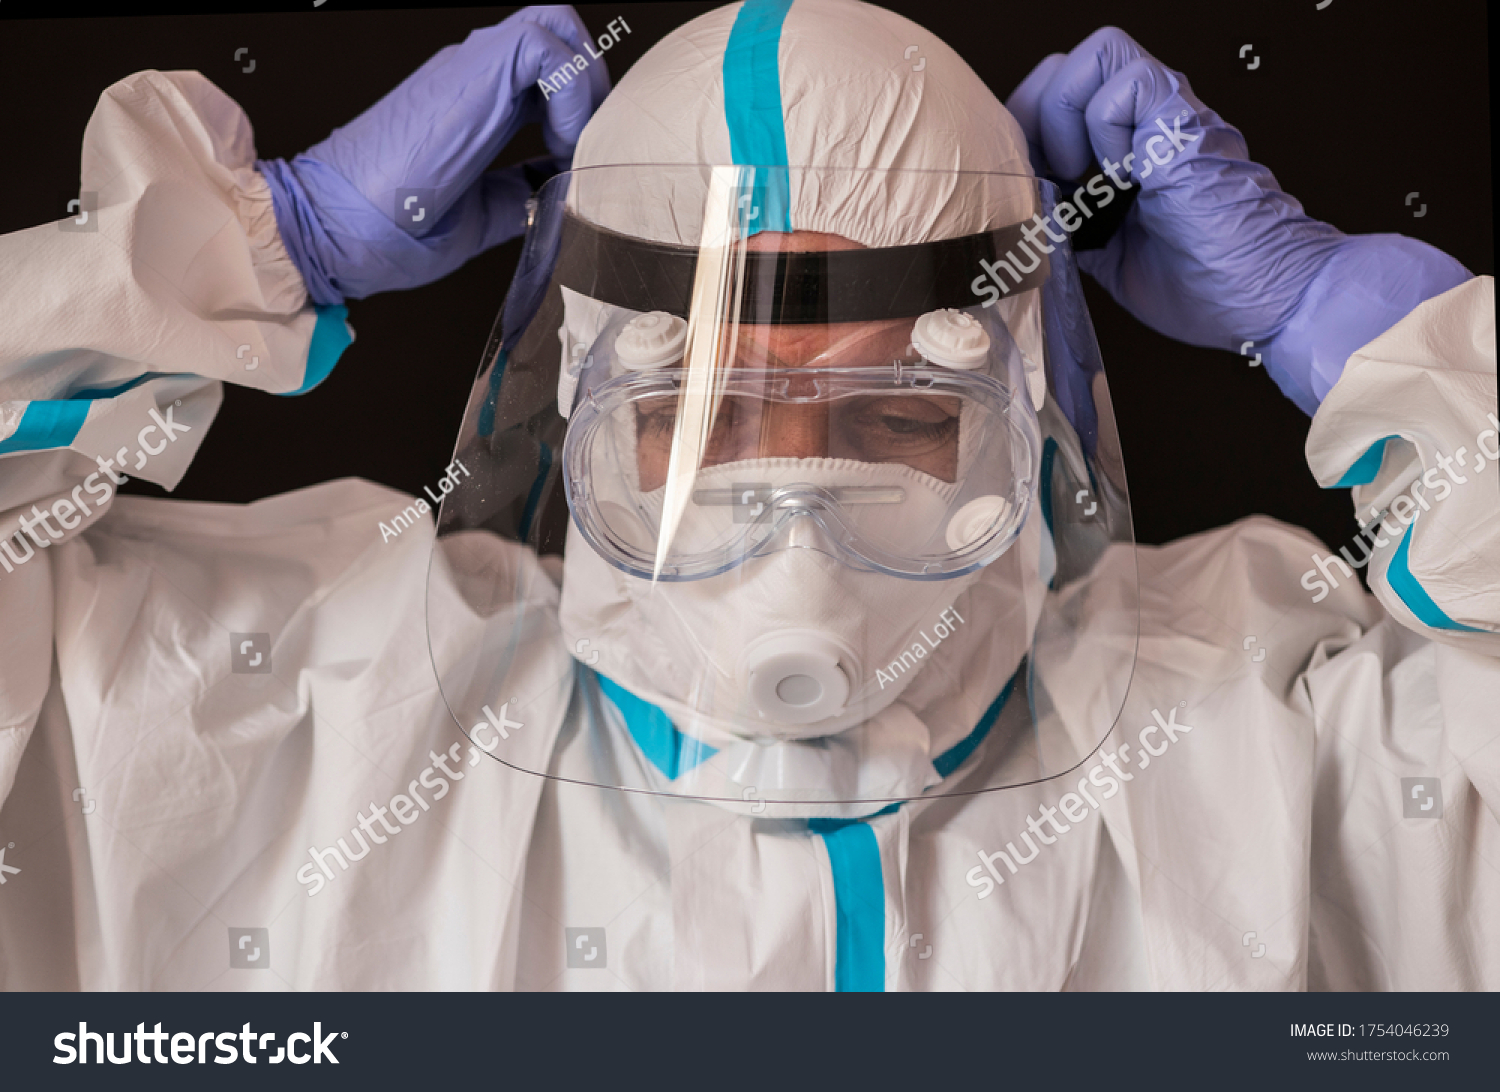 Portrait Doctor Wearing Personal Protective Equipment Stock Photo ...